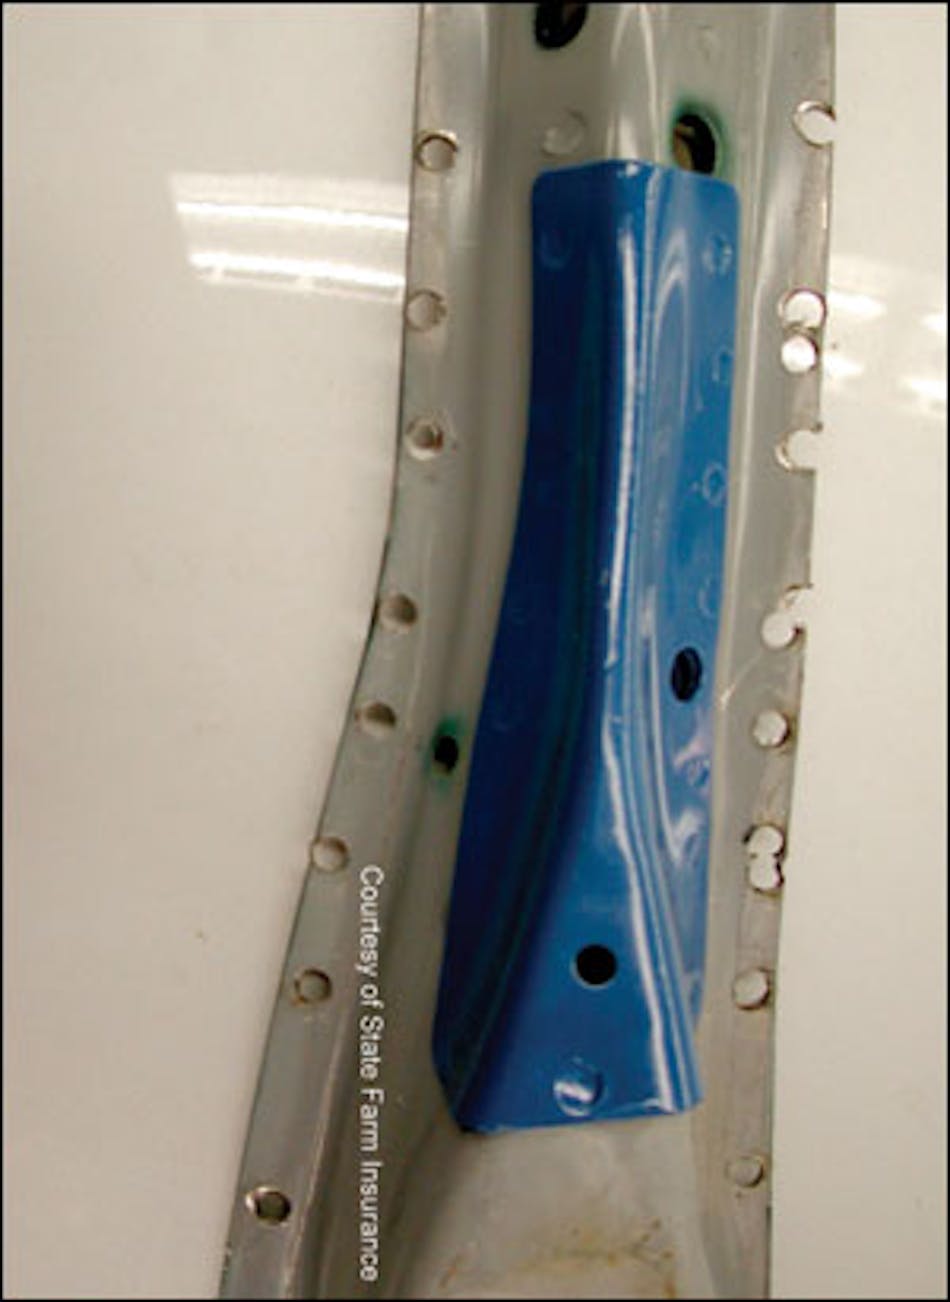 The opposite side of the Subaru Forester B-pillar clearly shows the additional high-strength, high-tension steel added at the mid point of the pillar. Blue paint has been added to enhance its visibility for training purposes. Note the location of the top door hinge mounting holes to better understand where this reinforcement is located in relation to the vehicle itself.